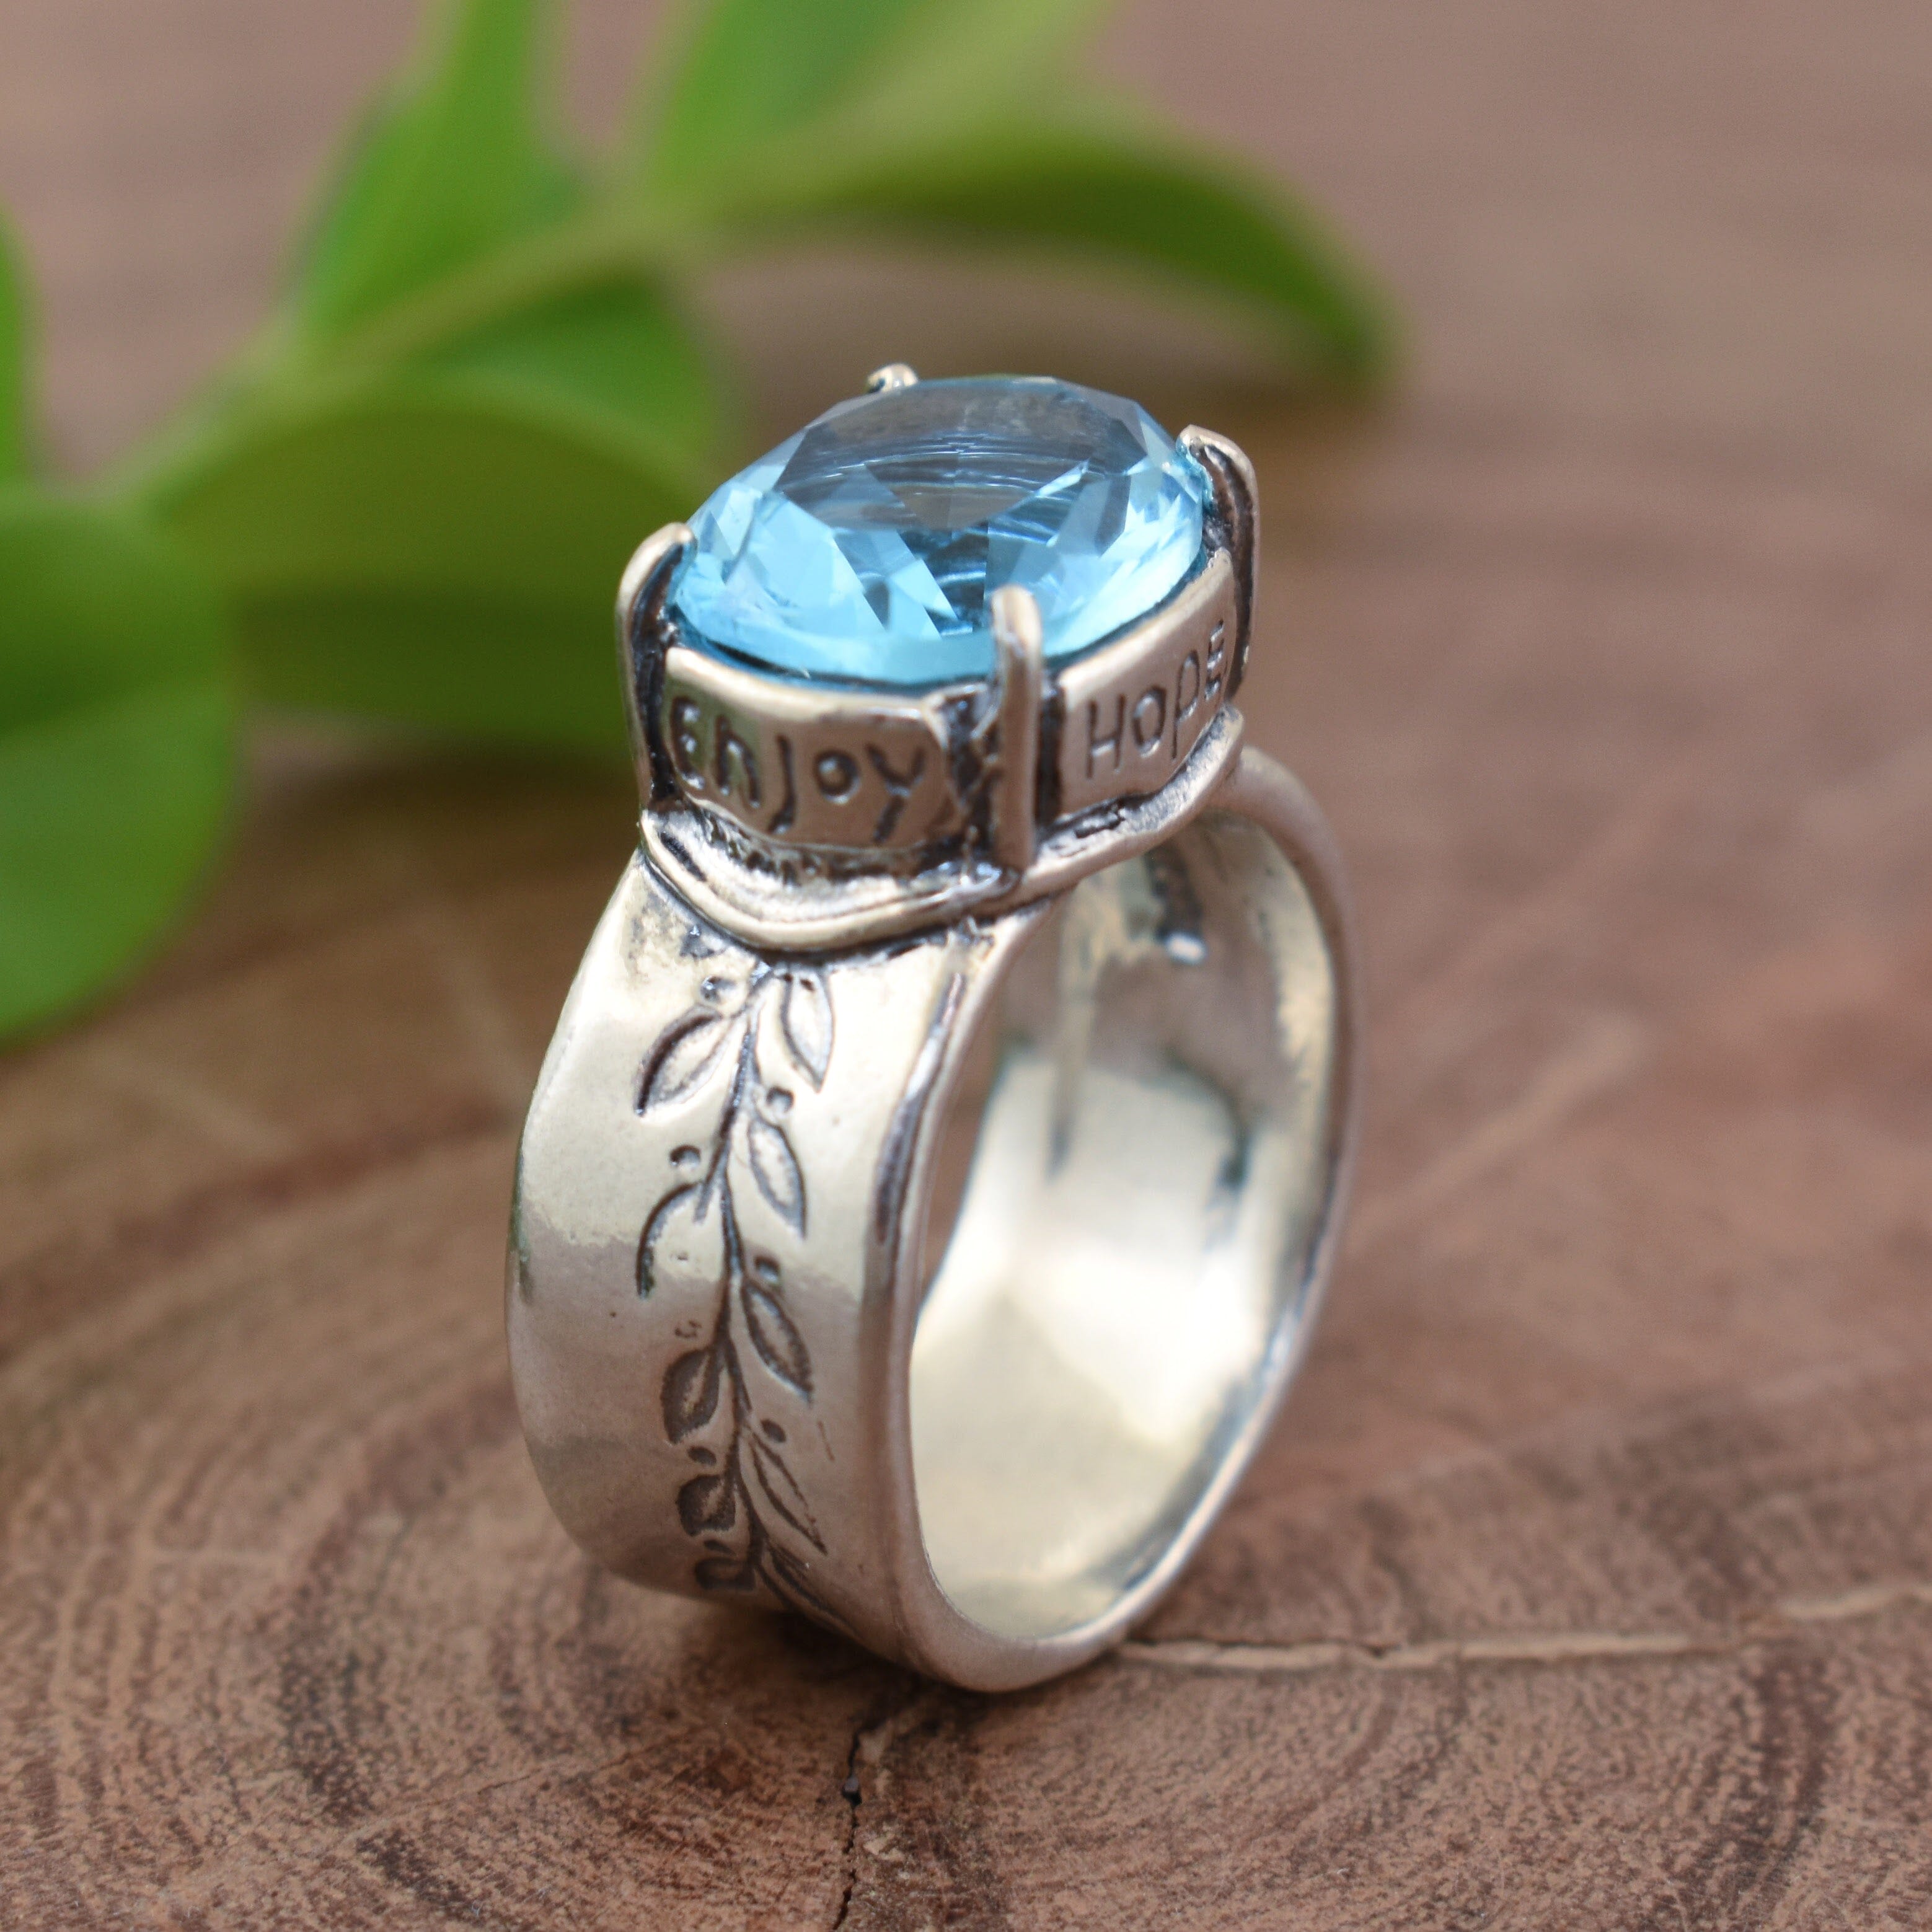 Sterling silver ring with vine detail and oval-shaped blue cubic zirconia stone